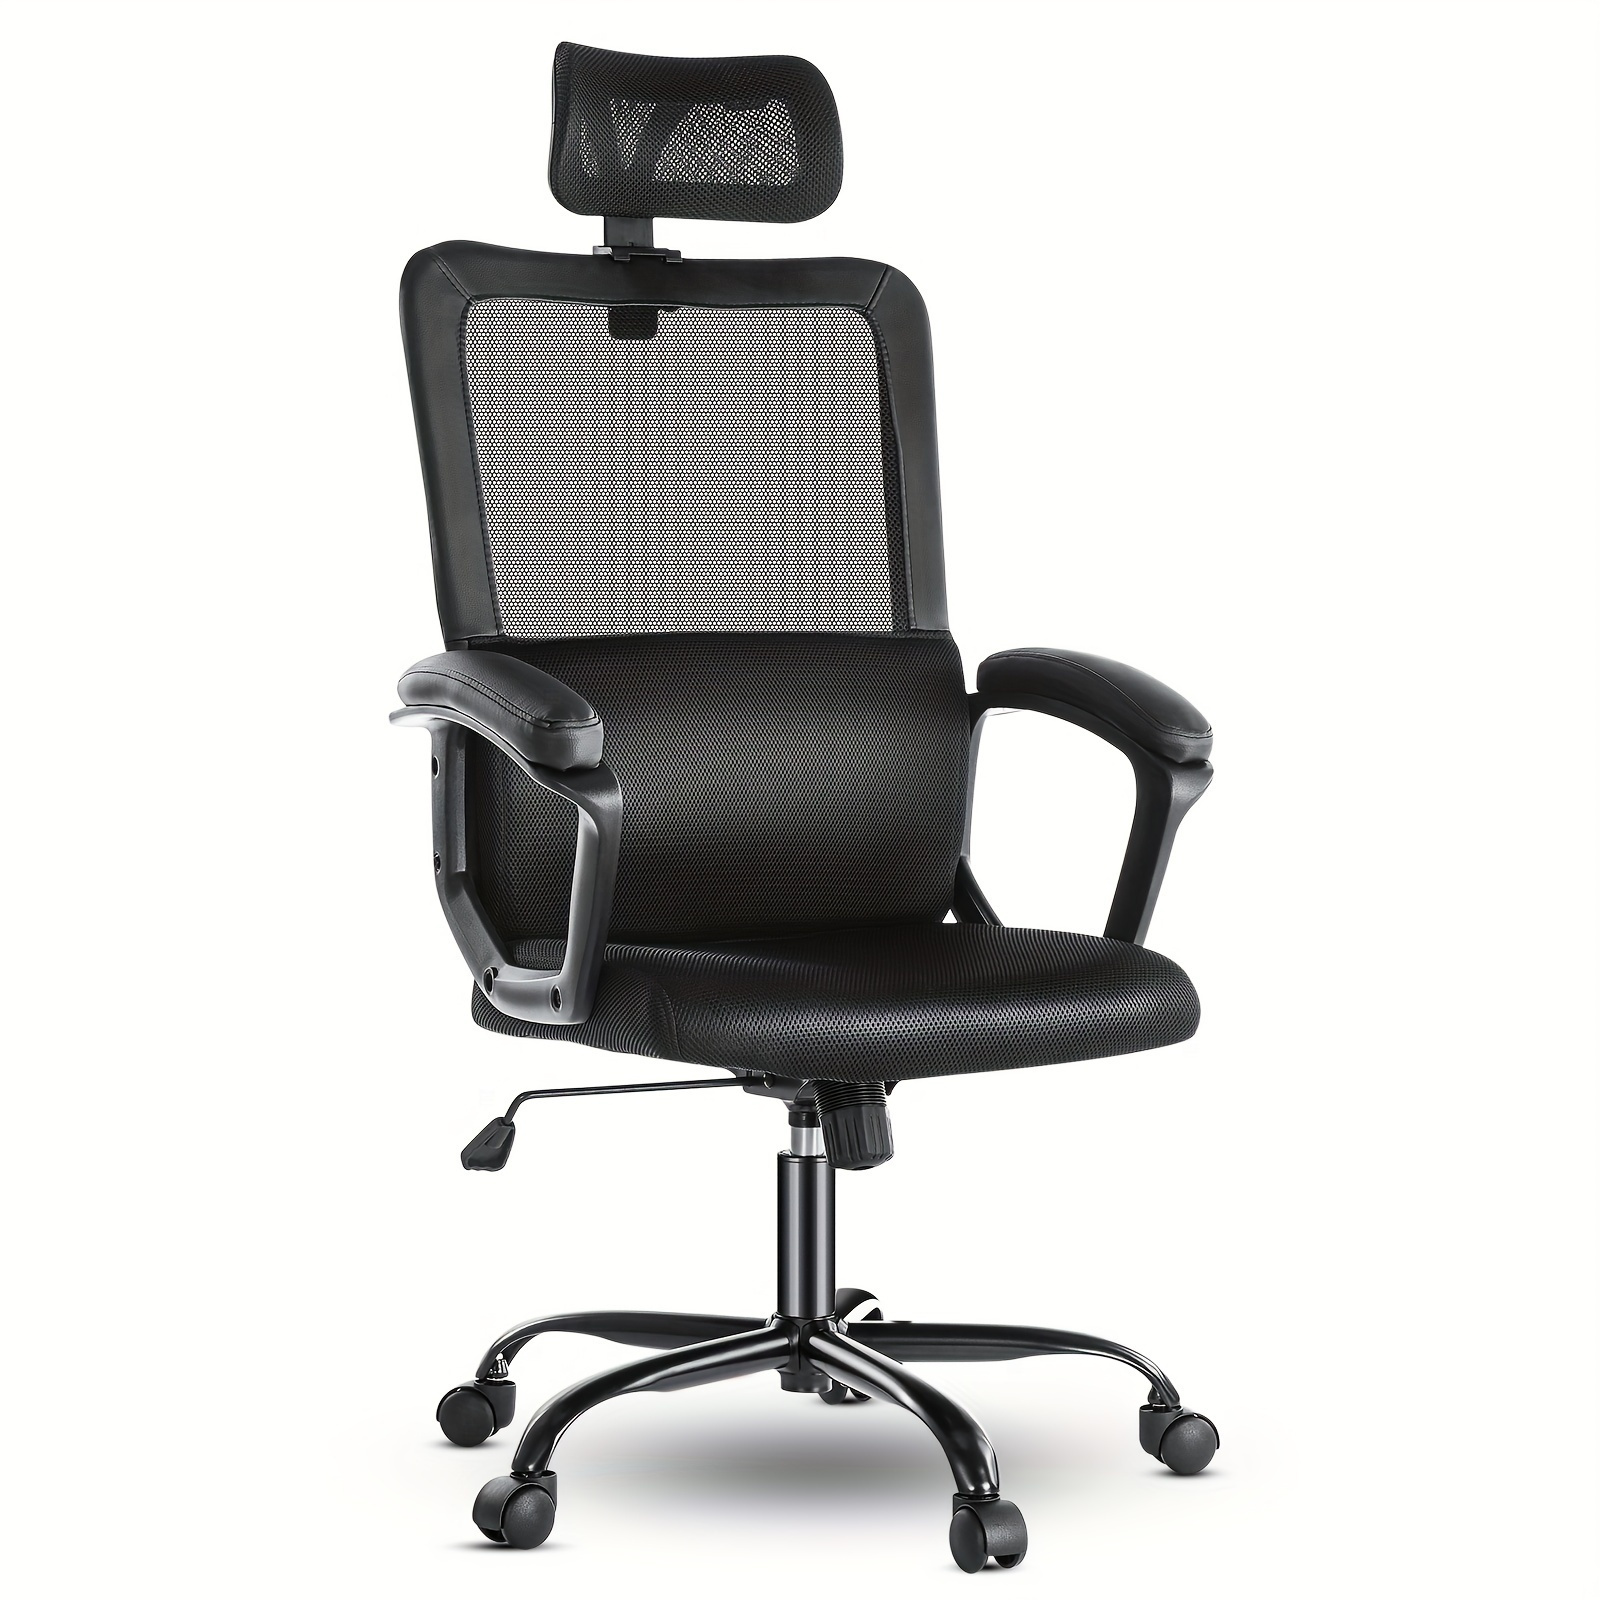 

Office Desk Computer Chair With Wheels, Ergonomic High Back Gaming Home Mesh Chairs, Lumbar Support Comfy Swivel, Adjustable Headrest, Comfortable Pillow, Soft Arms, 120° Tilt For Bedroom, Study